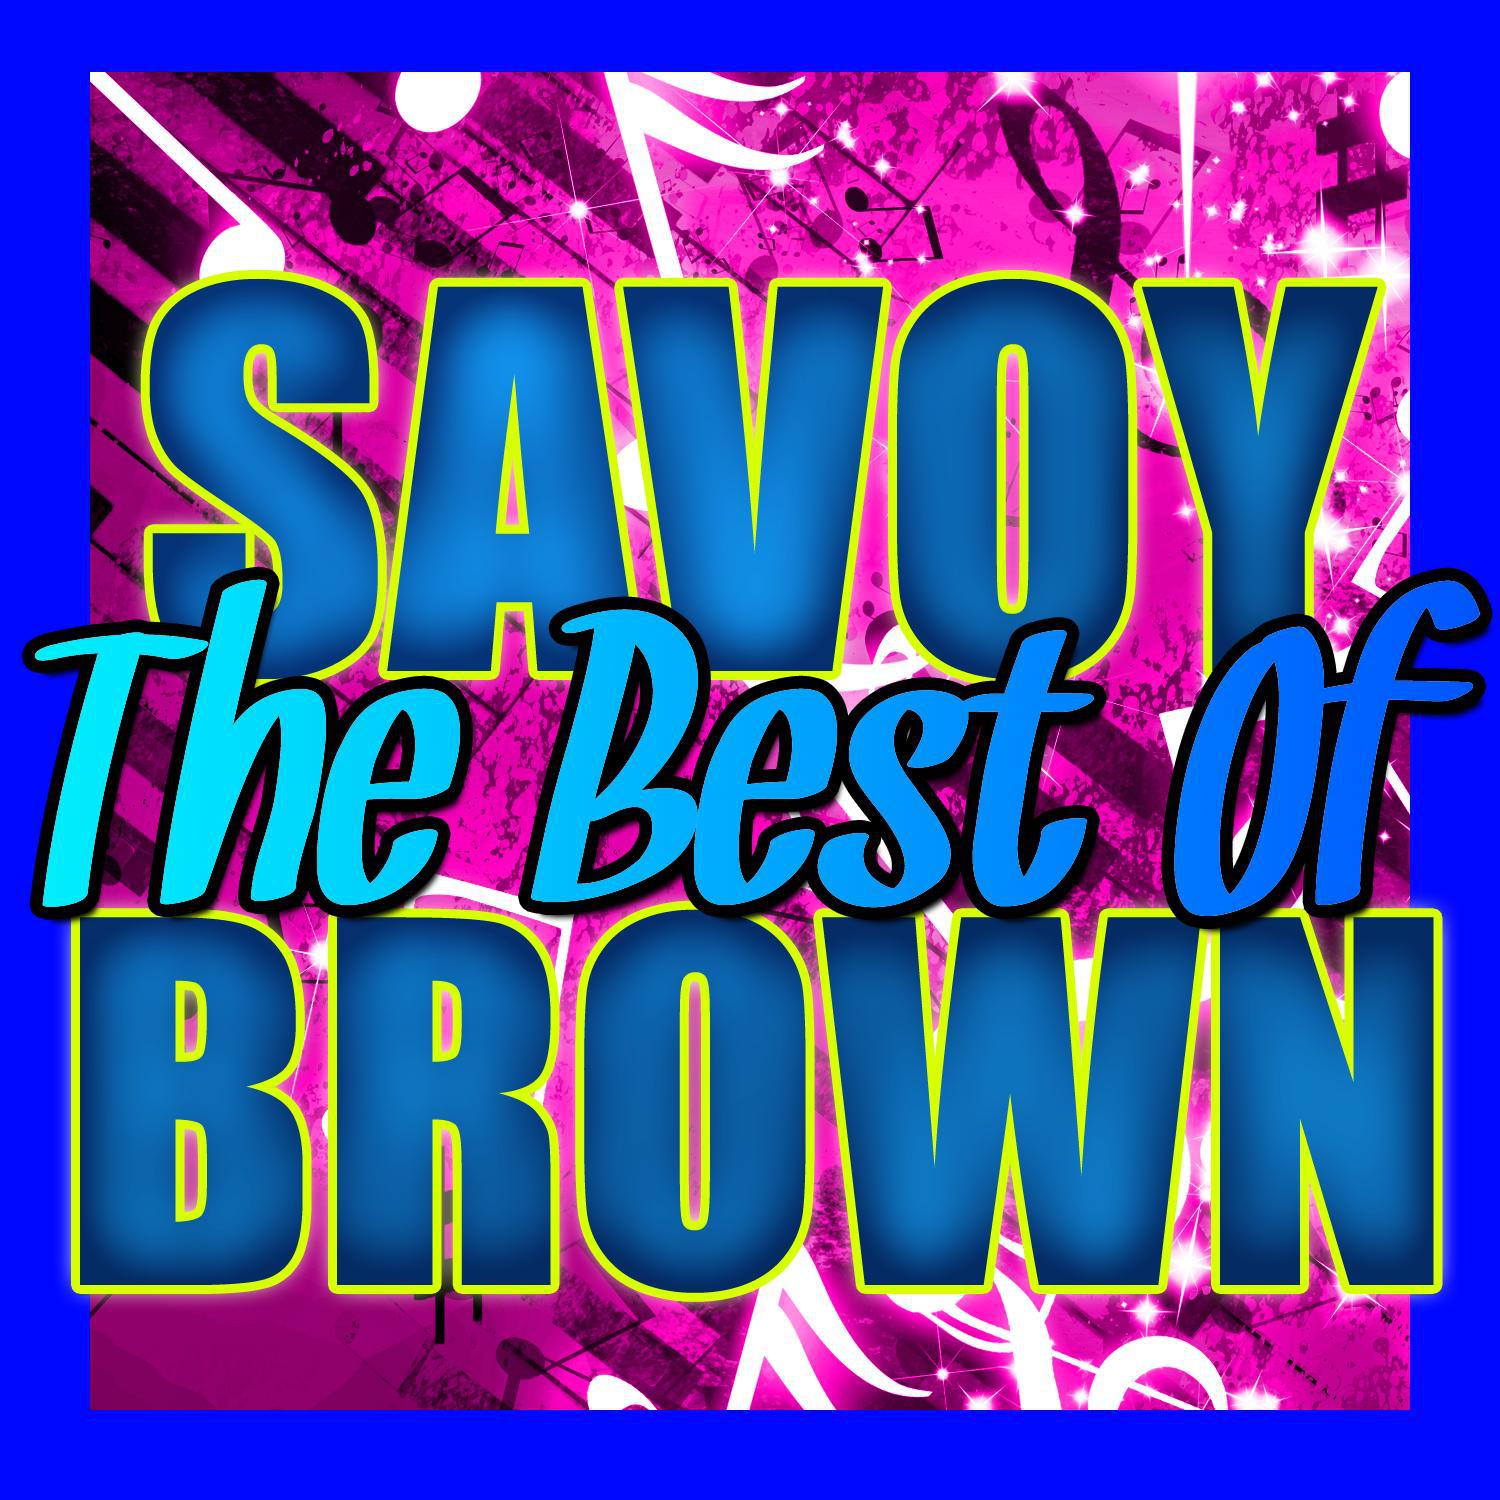 Savoy Brown - I Can't Get Next to You (Live)